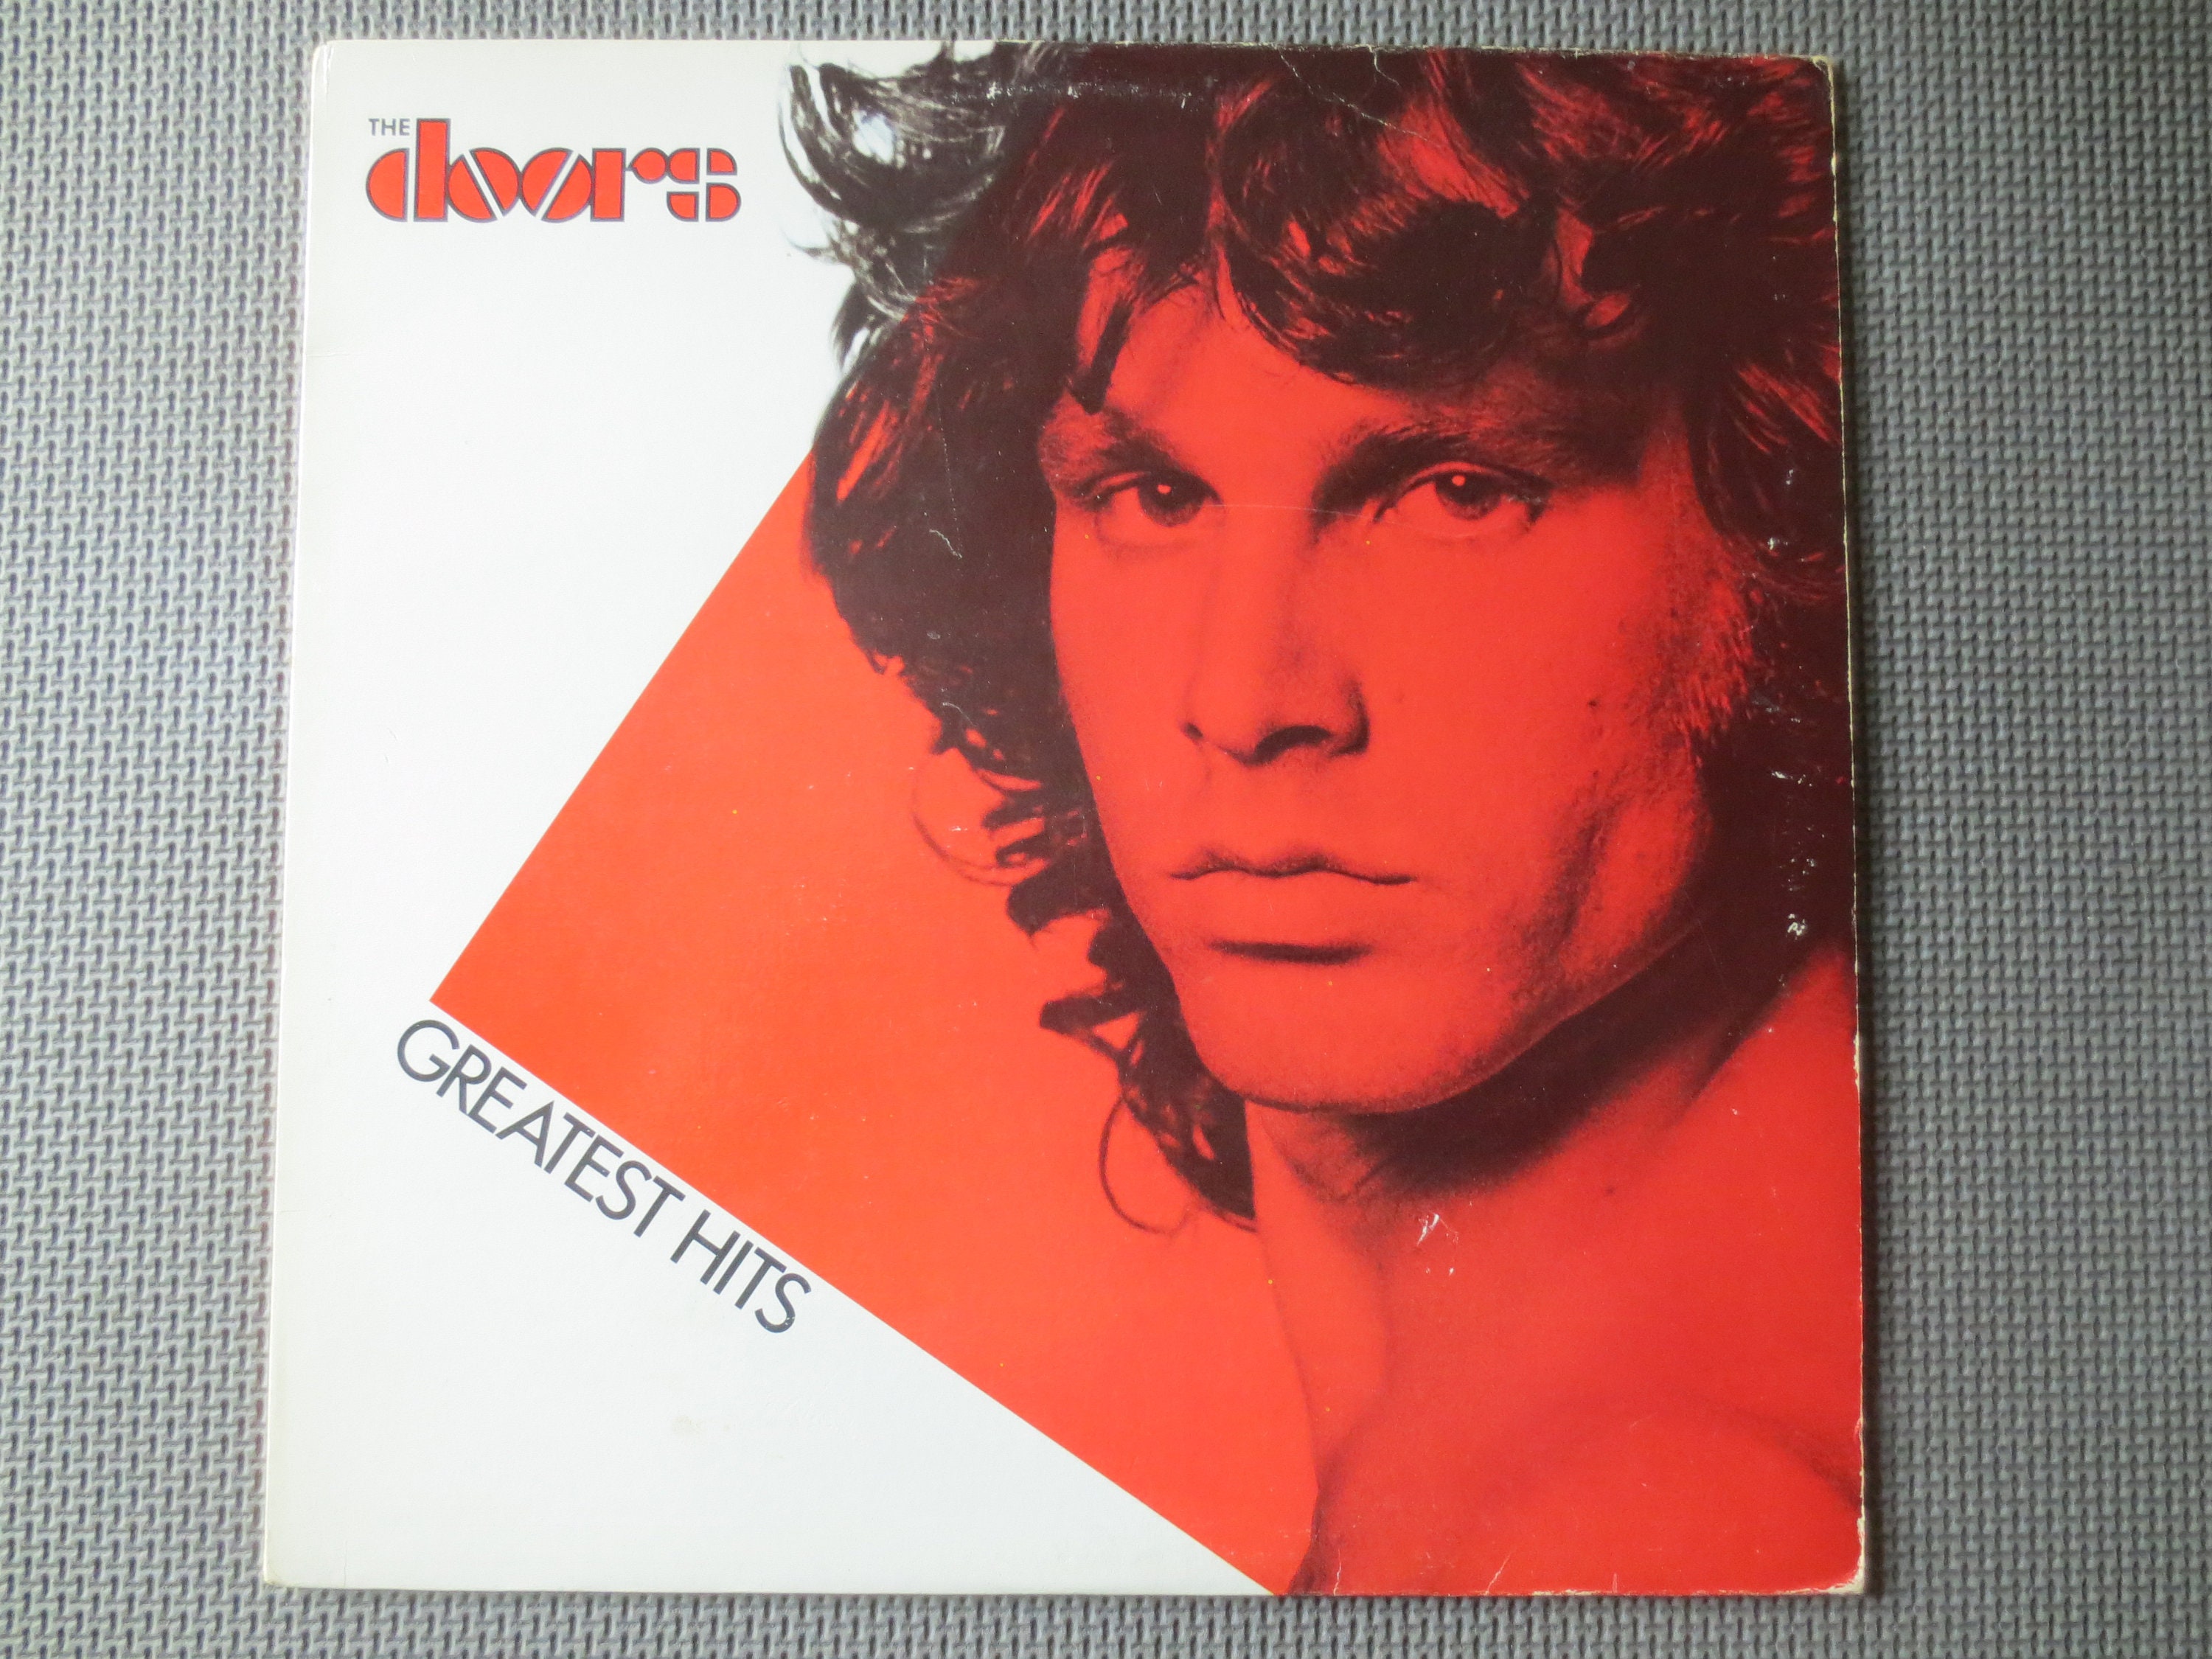 THE DOORS discography and reviews